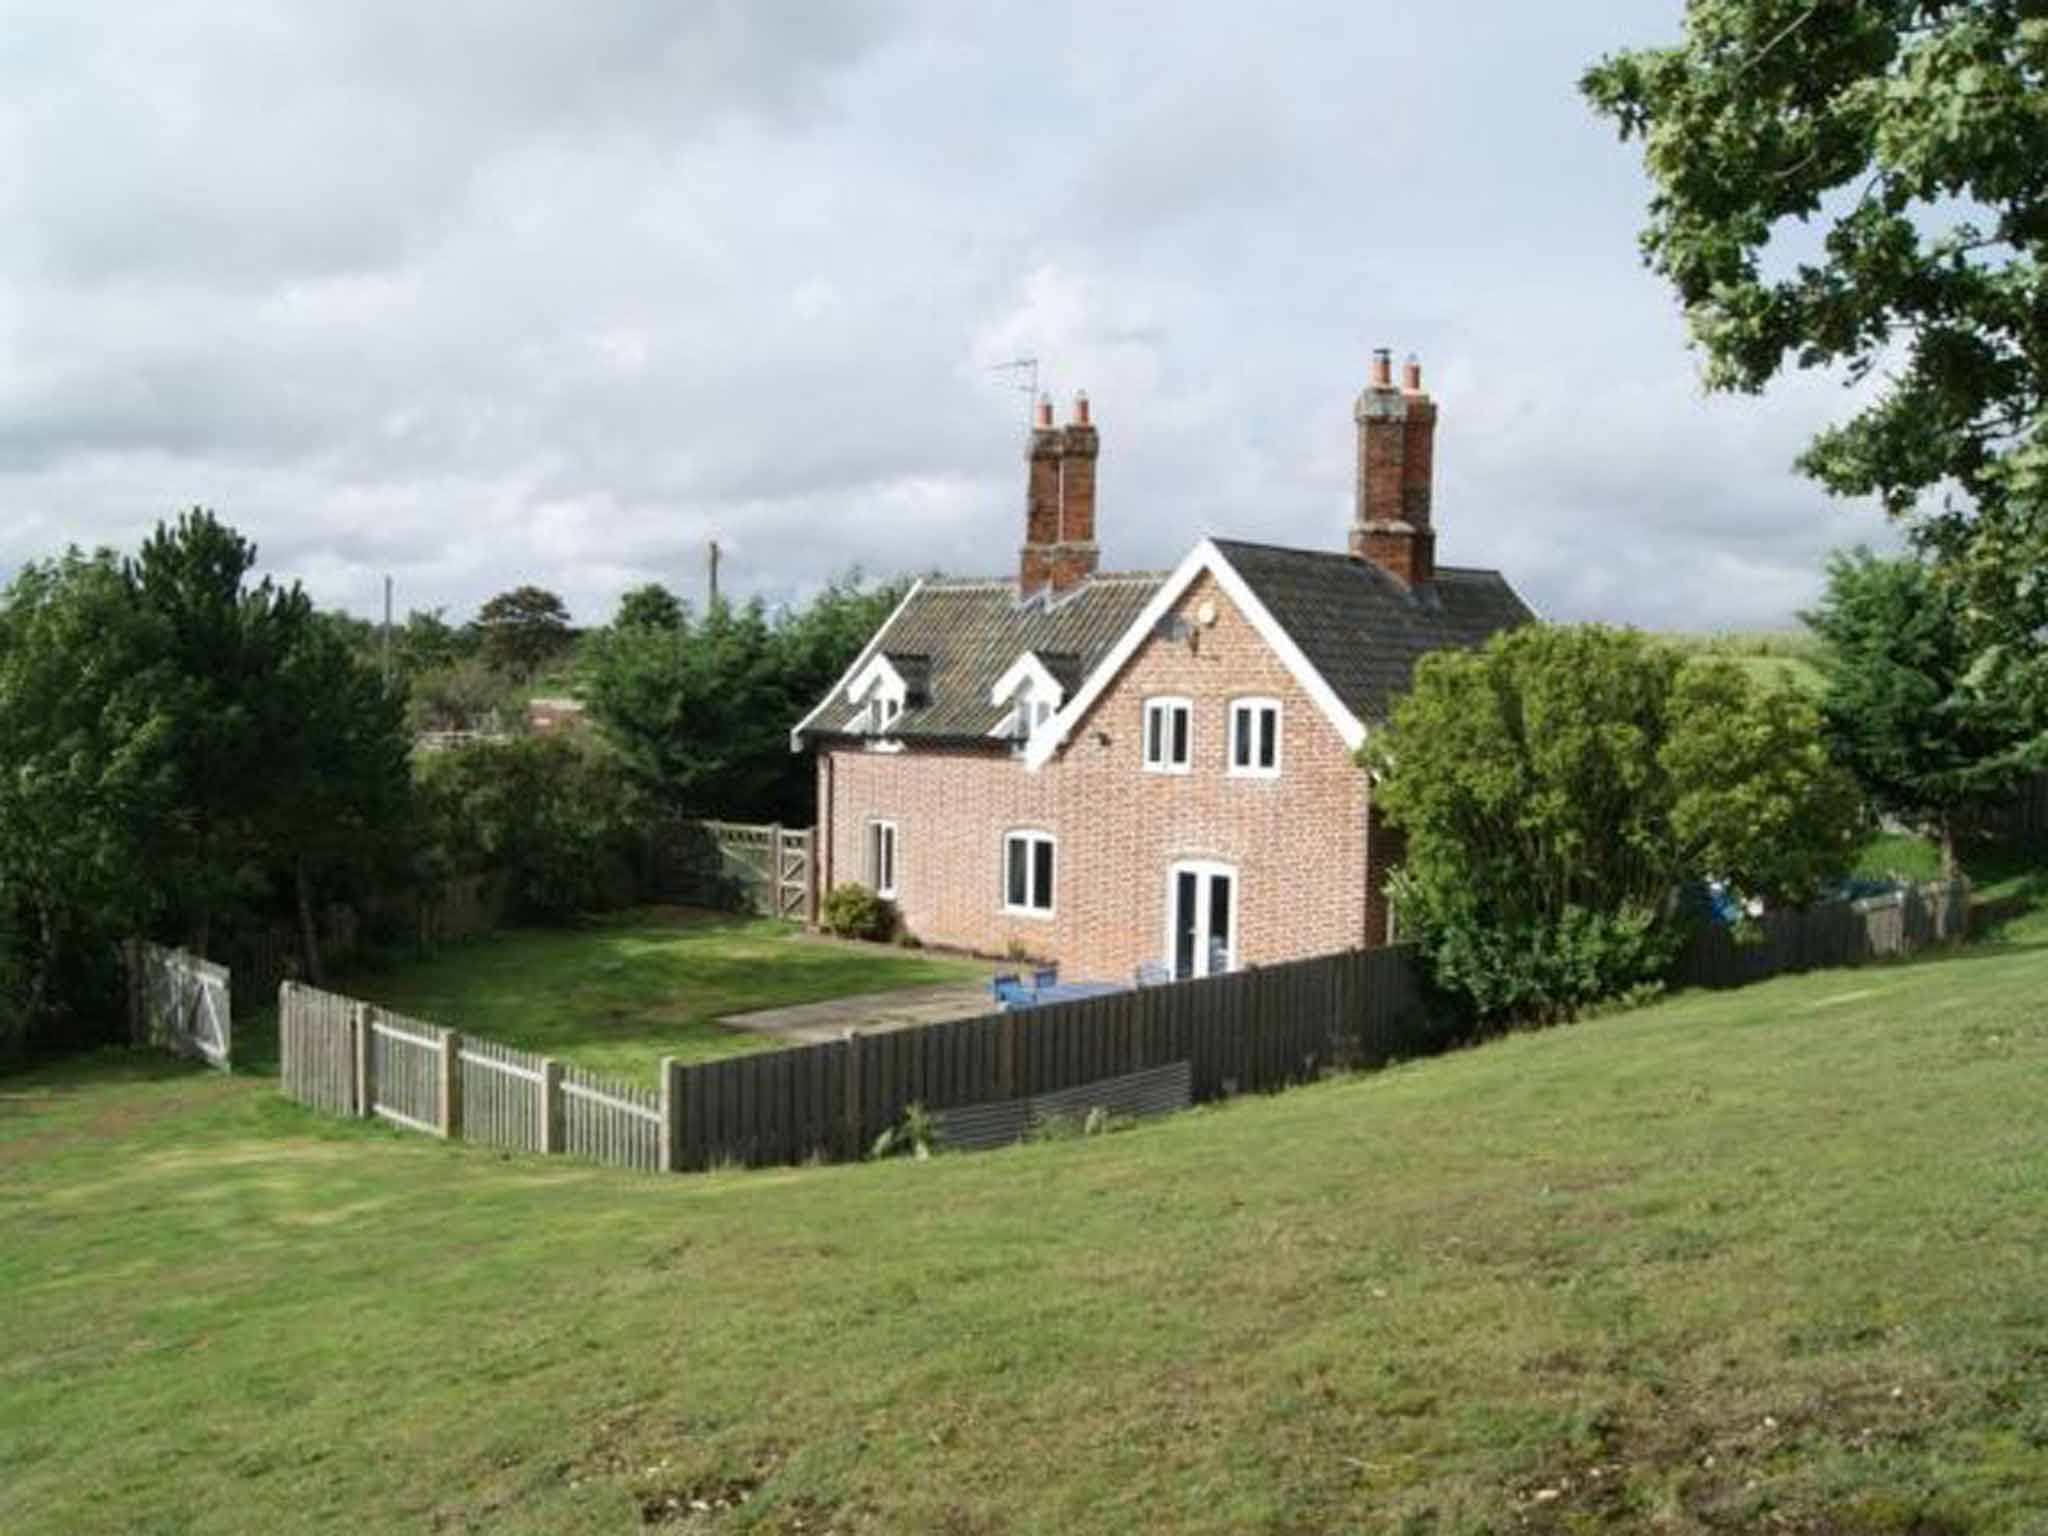 Quay Lane Cottage in Reydon, near Southwold, has three bedrooms, four acres and lovely rural views – plus a detached studio building. On with Flick & Son for £625,000